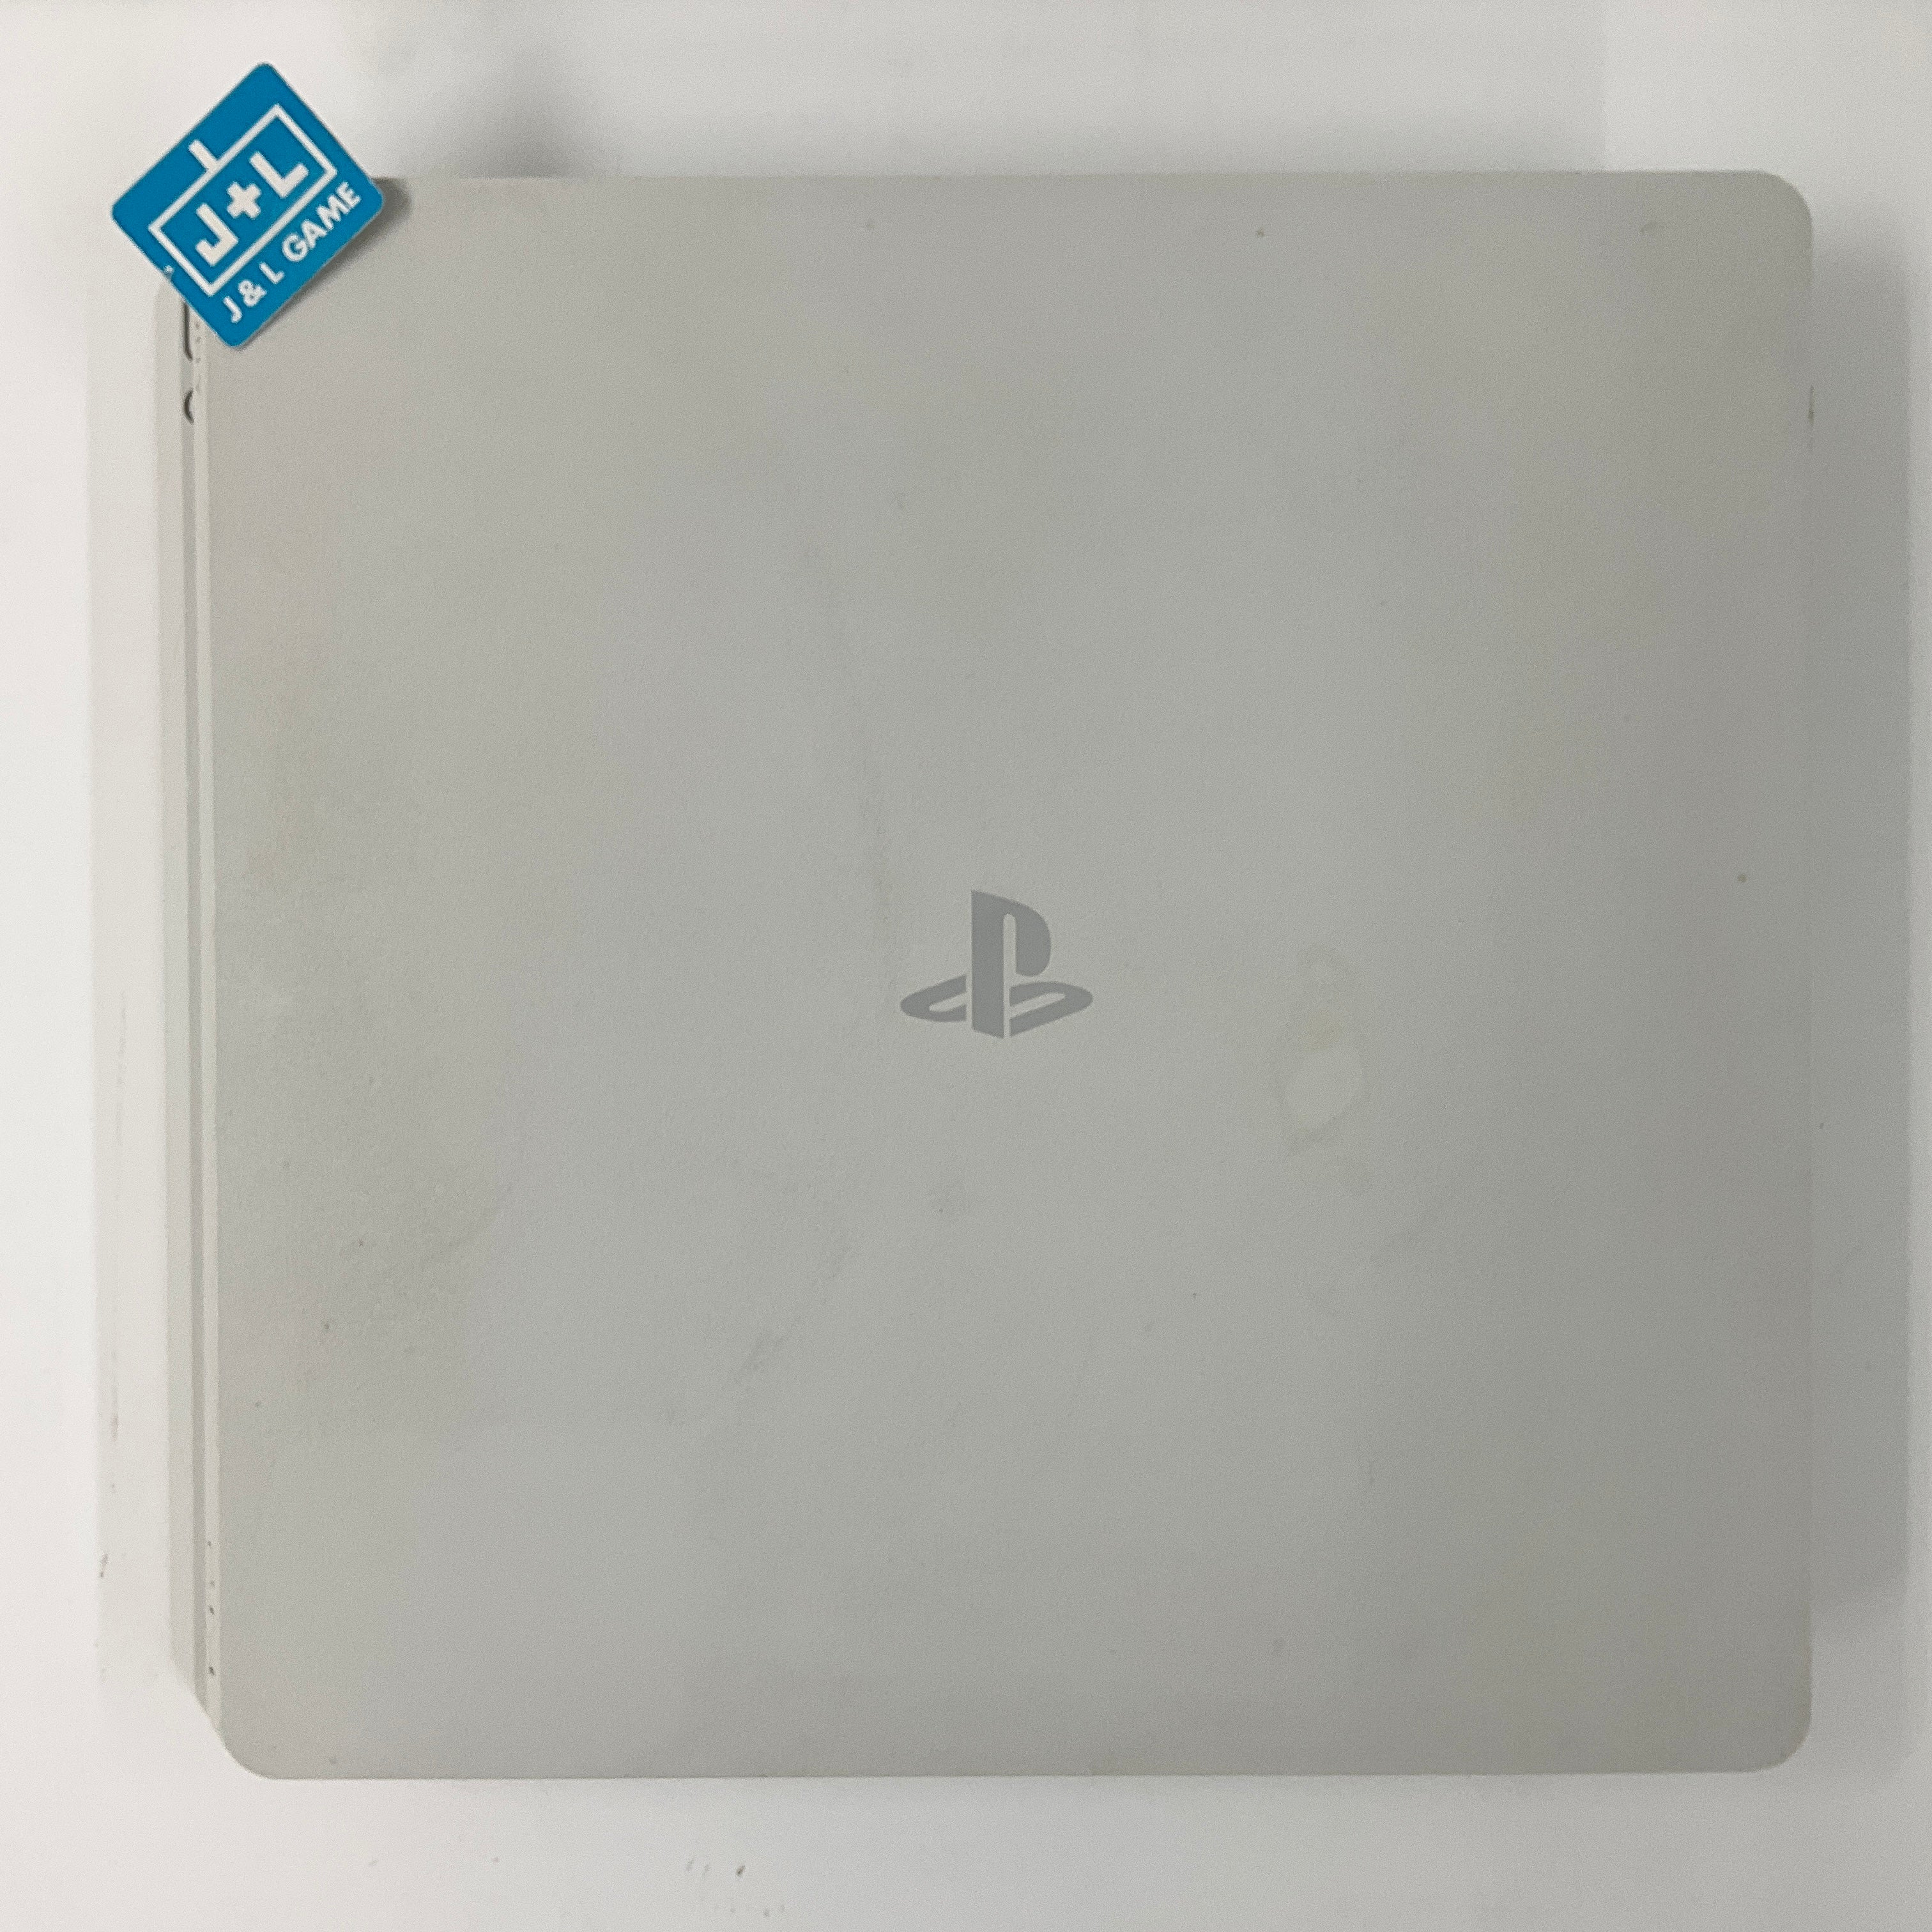 Sony PlayStation 4 Slim Console 500GB (White) - (PS4) Playstation 4 [Pre-Owned] Consoles Sony   